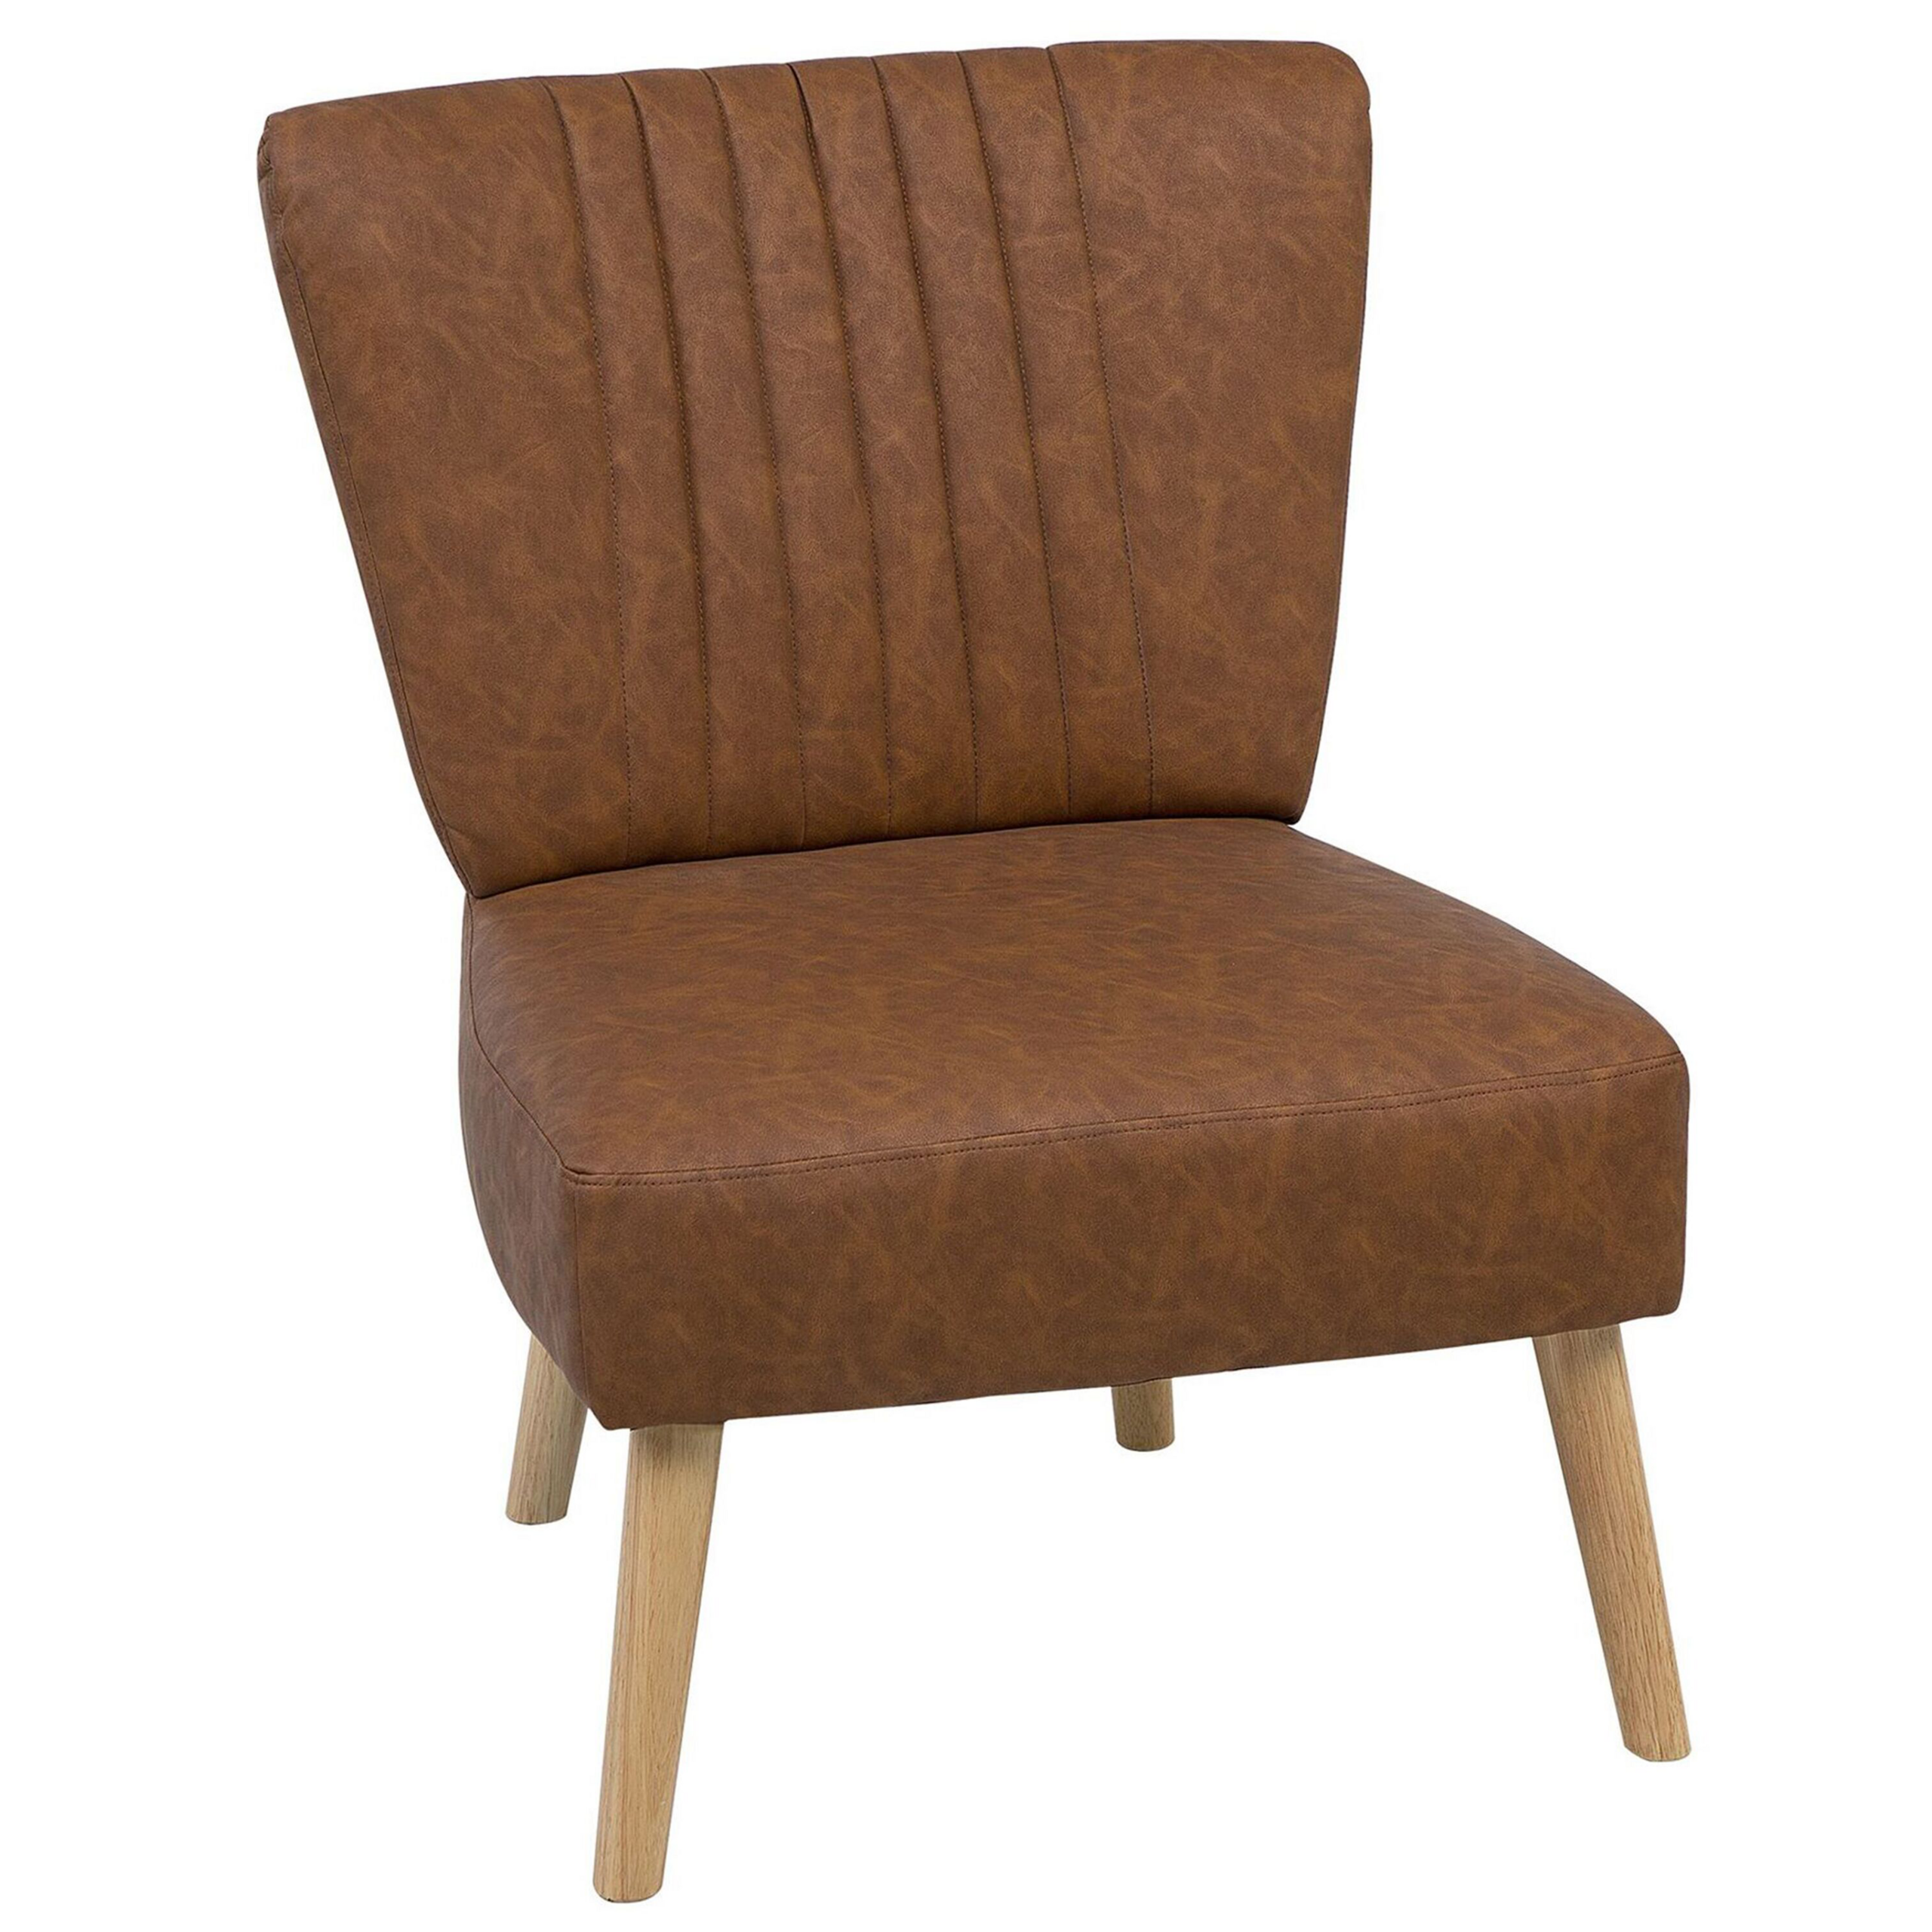 Beliani Armchair Golden Brown Faux Leather Armless Accent Chair Armless Vertical Tufting Wooden Legs